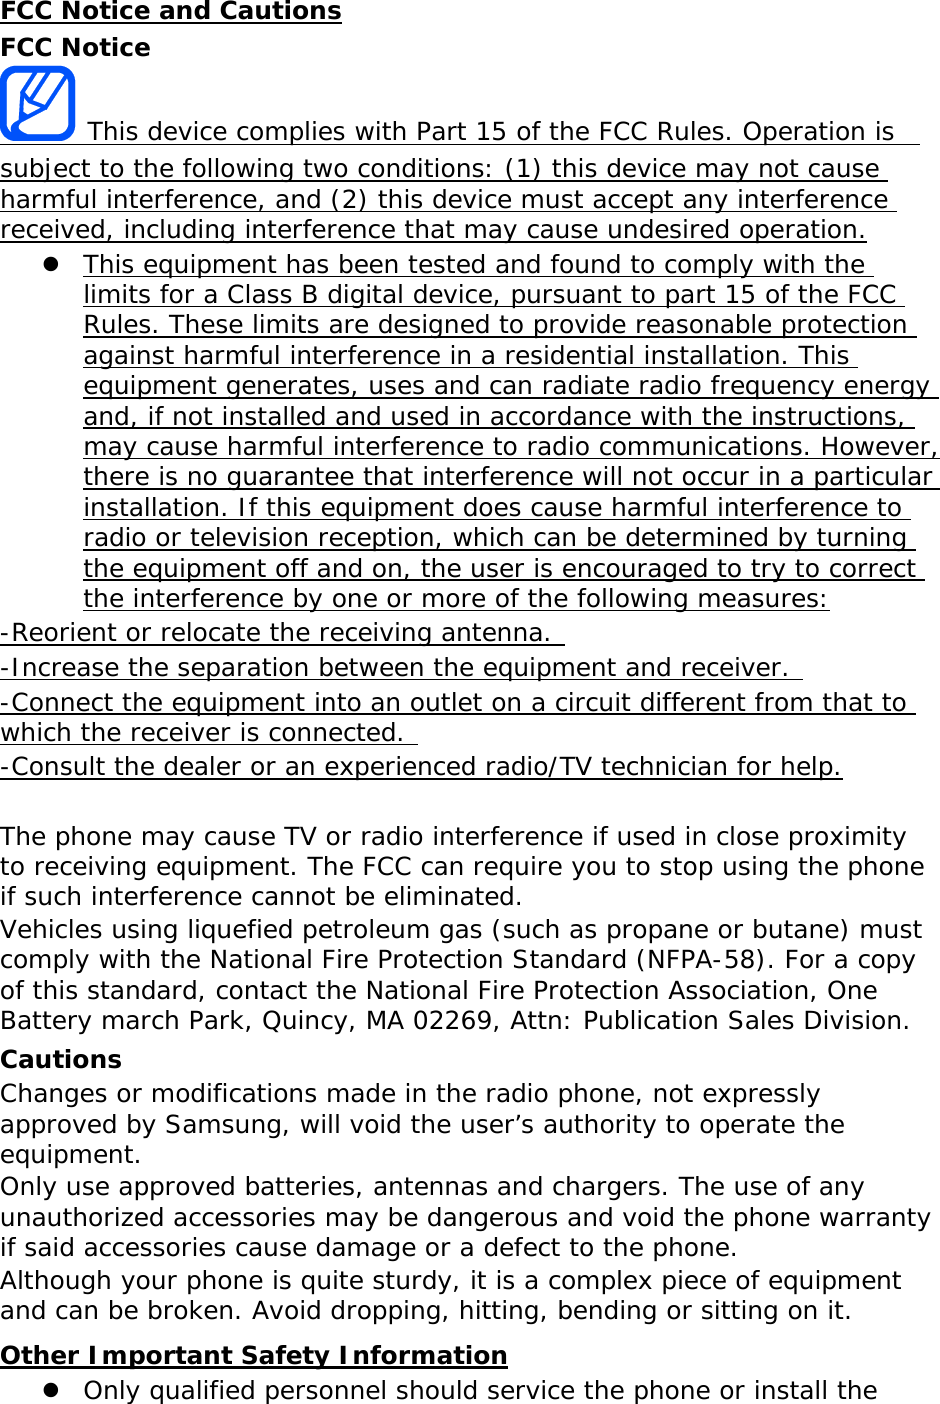 FCC Notice and Cautions FCC Notice  This device complies with Part 15 of the FCC Rules. Operation is  subject to the following two conditions: (1) this device may not cause harmful interference, and (2) this device must accept any interference received, including interference that may cause undesired operation.  This equipment has been tested and found to comply with the limits for a Class B digital device, pursuant to part 15 of the FCC Rules. These limits are designed to provide reasonable protection against harmful interference in a residential installation. This equipment generates, uses and can radiate radio frequency energy and, if not installed and used in accordance with the instructions, may cause harmful interference to radio communications. However, there is no guarantee that interference will not occur in a particular installation. If this equipment does cause harmful interference to radio or television reception, which can be determined by turning the equipment off and on, the user is encouraged to try to correct the interference by one or more of the following measures: -Reorient or relocate the receiving antenna.  -Increase the separation between the equipment and receiver.  -Connect the equipment into an outlet on a circuit different from that to which the receiver is connected.  -Consult the dealer or an experienced radio/TV technician for help.  The phone may cause TV or radio interference if used in close proximity to receiving equipment. The FCC can require you to stop using the phone if such interference cannot be eliminated. Vehicles using liquefied petroleum gas (such as propane or butane) must comply with the National Fire Protection Standard (NFPA-58). For a copy of this standard, contact the National Fire Protection Association, One Battery march Park, Quincy, MA 02269, Attn: Publication Sales Division. Cautions Changes or modifications made in the radio phone, not expressly approved by Samsung, will void the user’s authority to operate the equipment. Only use approved batteries, antennas and chargers. The use of any unauthorized accessories may be dangerous and void the phone warranty if said accessories cause damage or a defect to the phone. Although your phone is quite sturdy, it is a complex piece of equipment and can be broken. Avoid dropping, hitting, bending or sitting on it. Other Important Safety Information  Only qualified personnel should service the phone or install the 